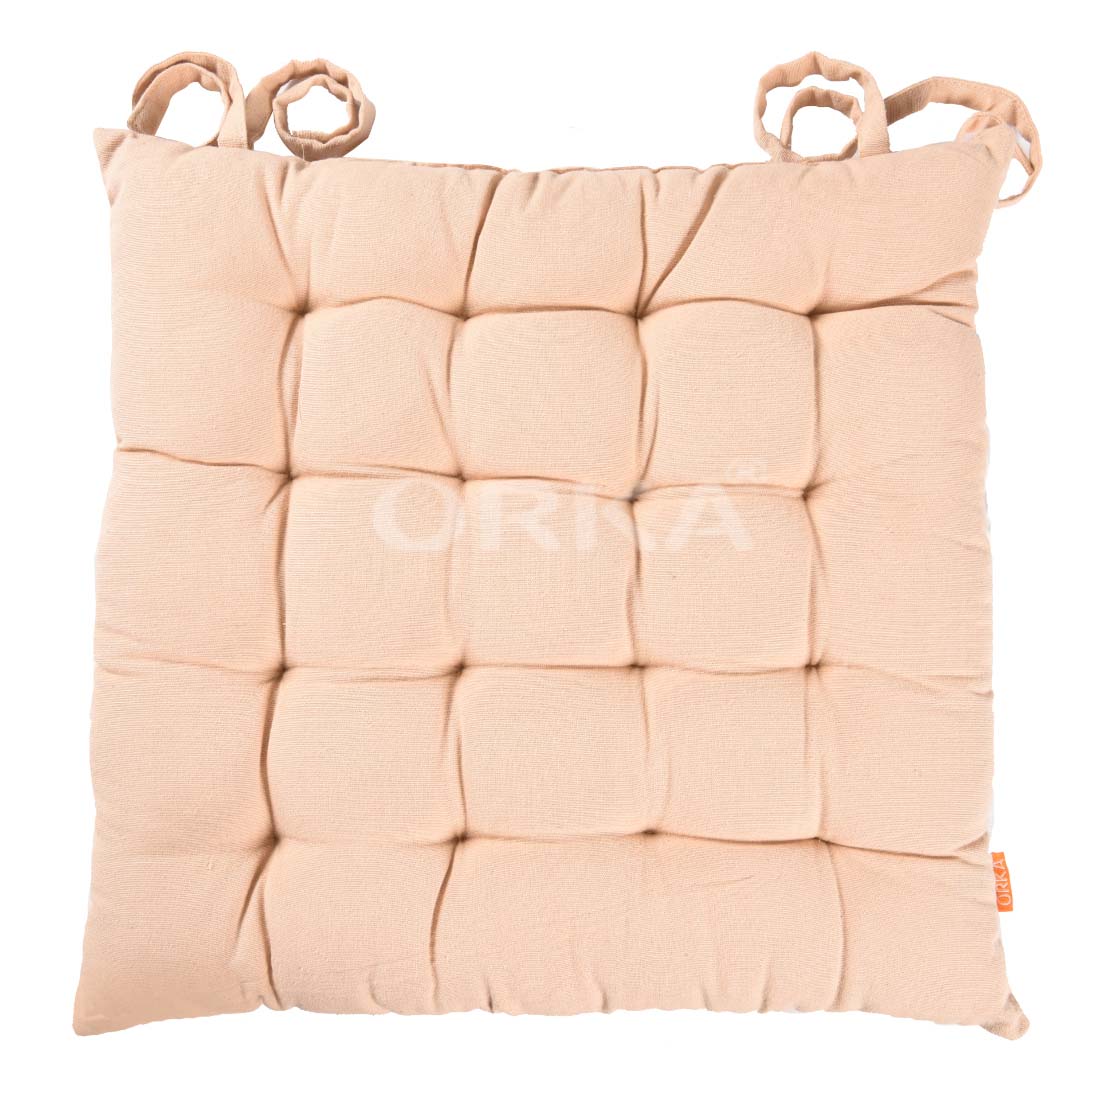 ORKA Chair Pad Light Pink Color  